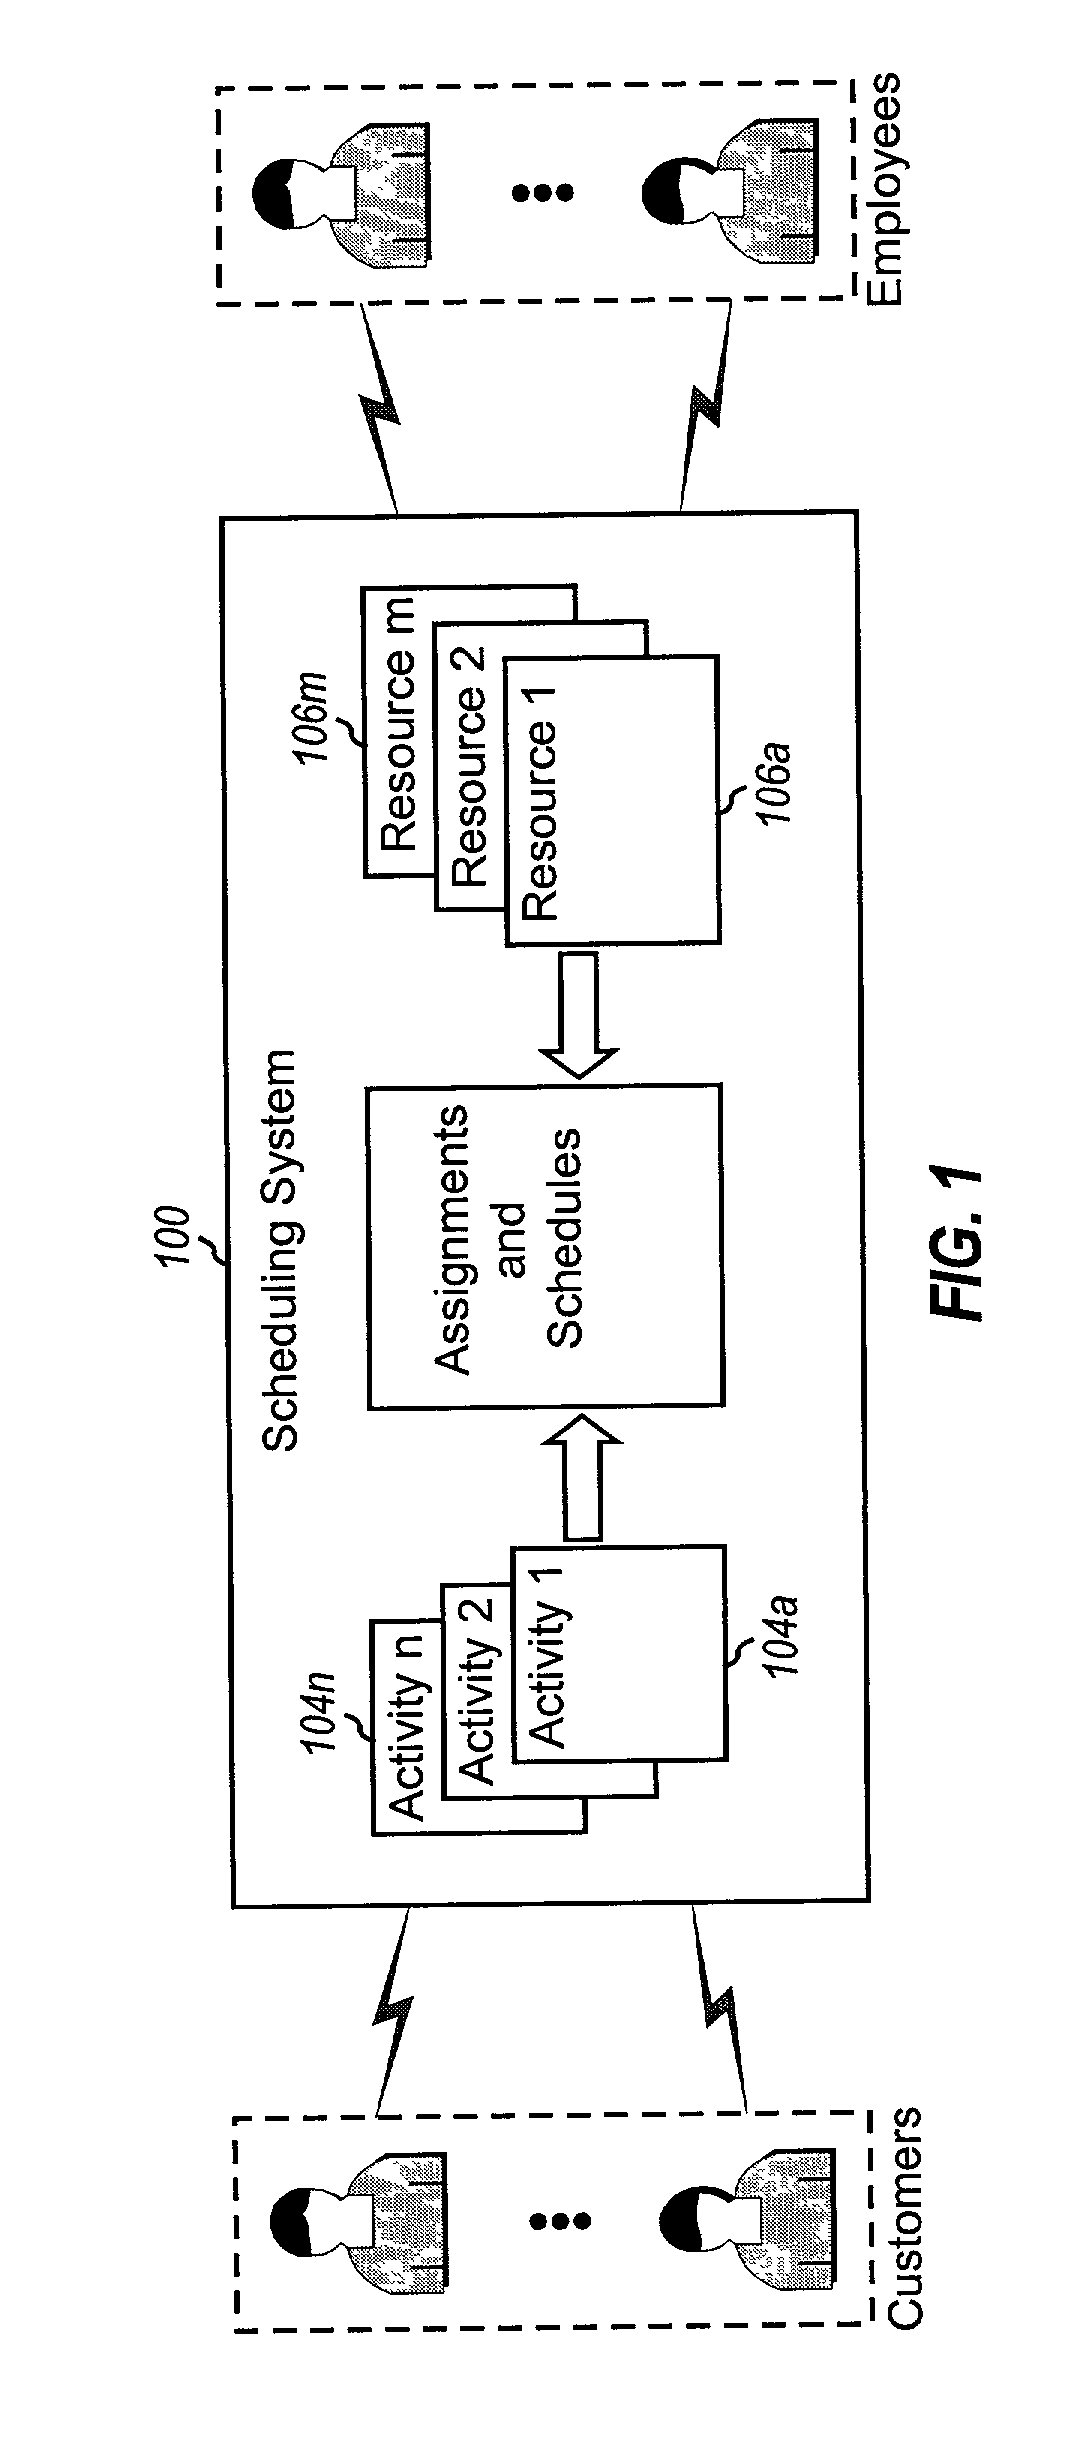 Method and system for scheduling activities